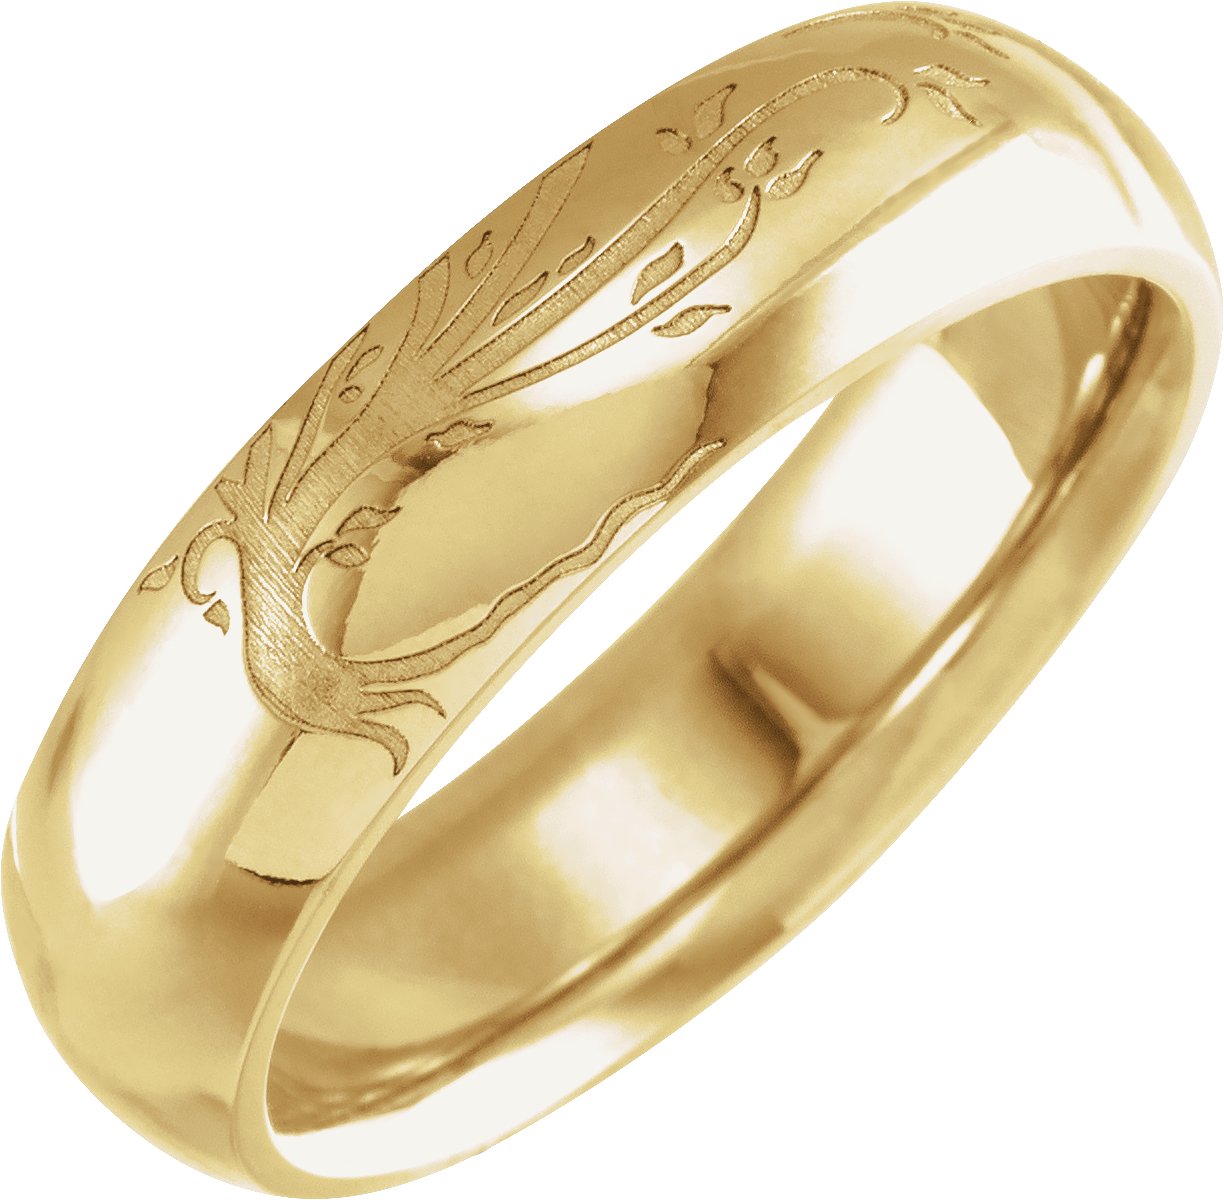 10K Yellow 6 mm Engraved Family Tree Ring Size 10